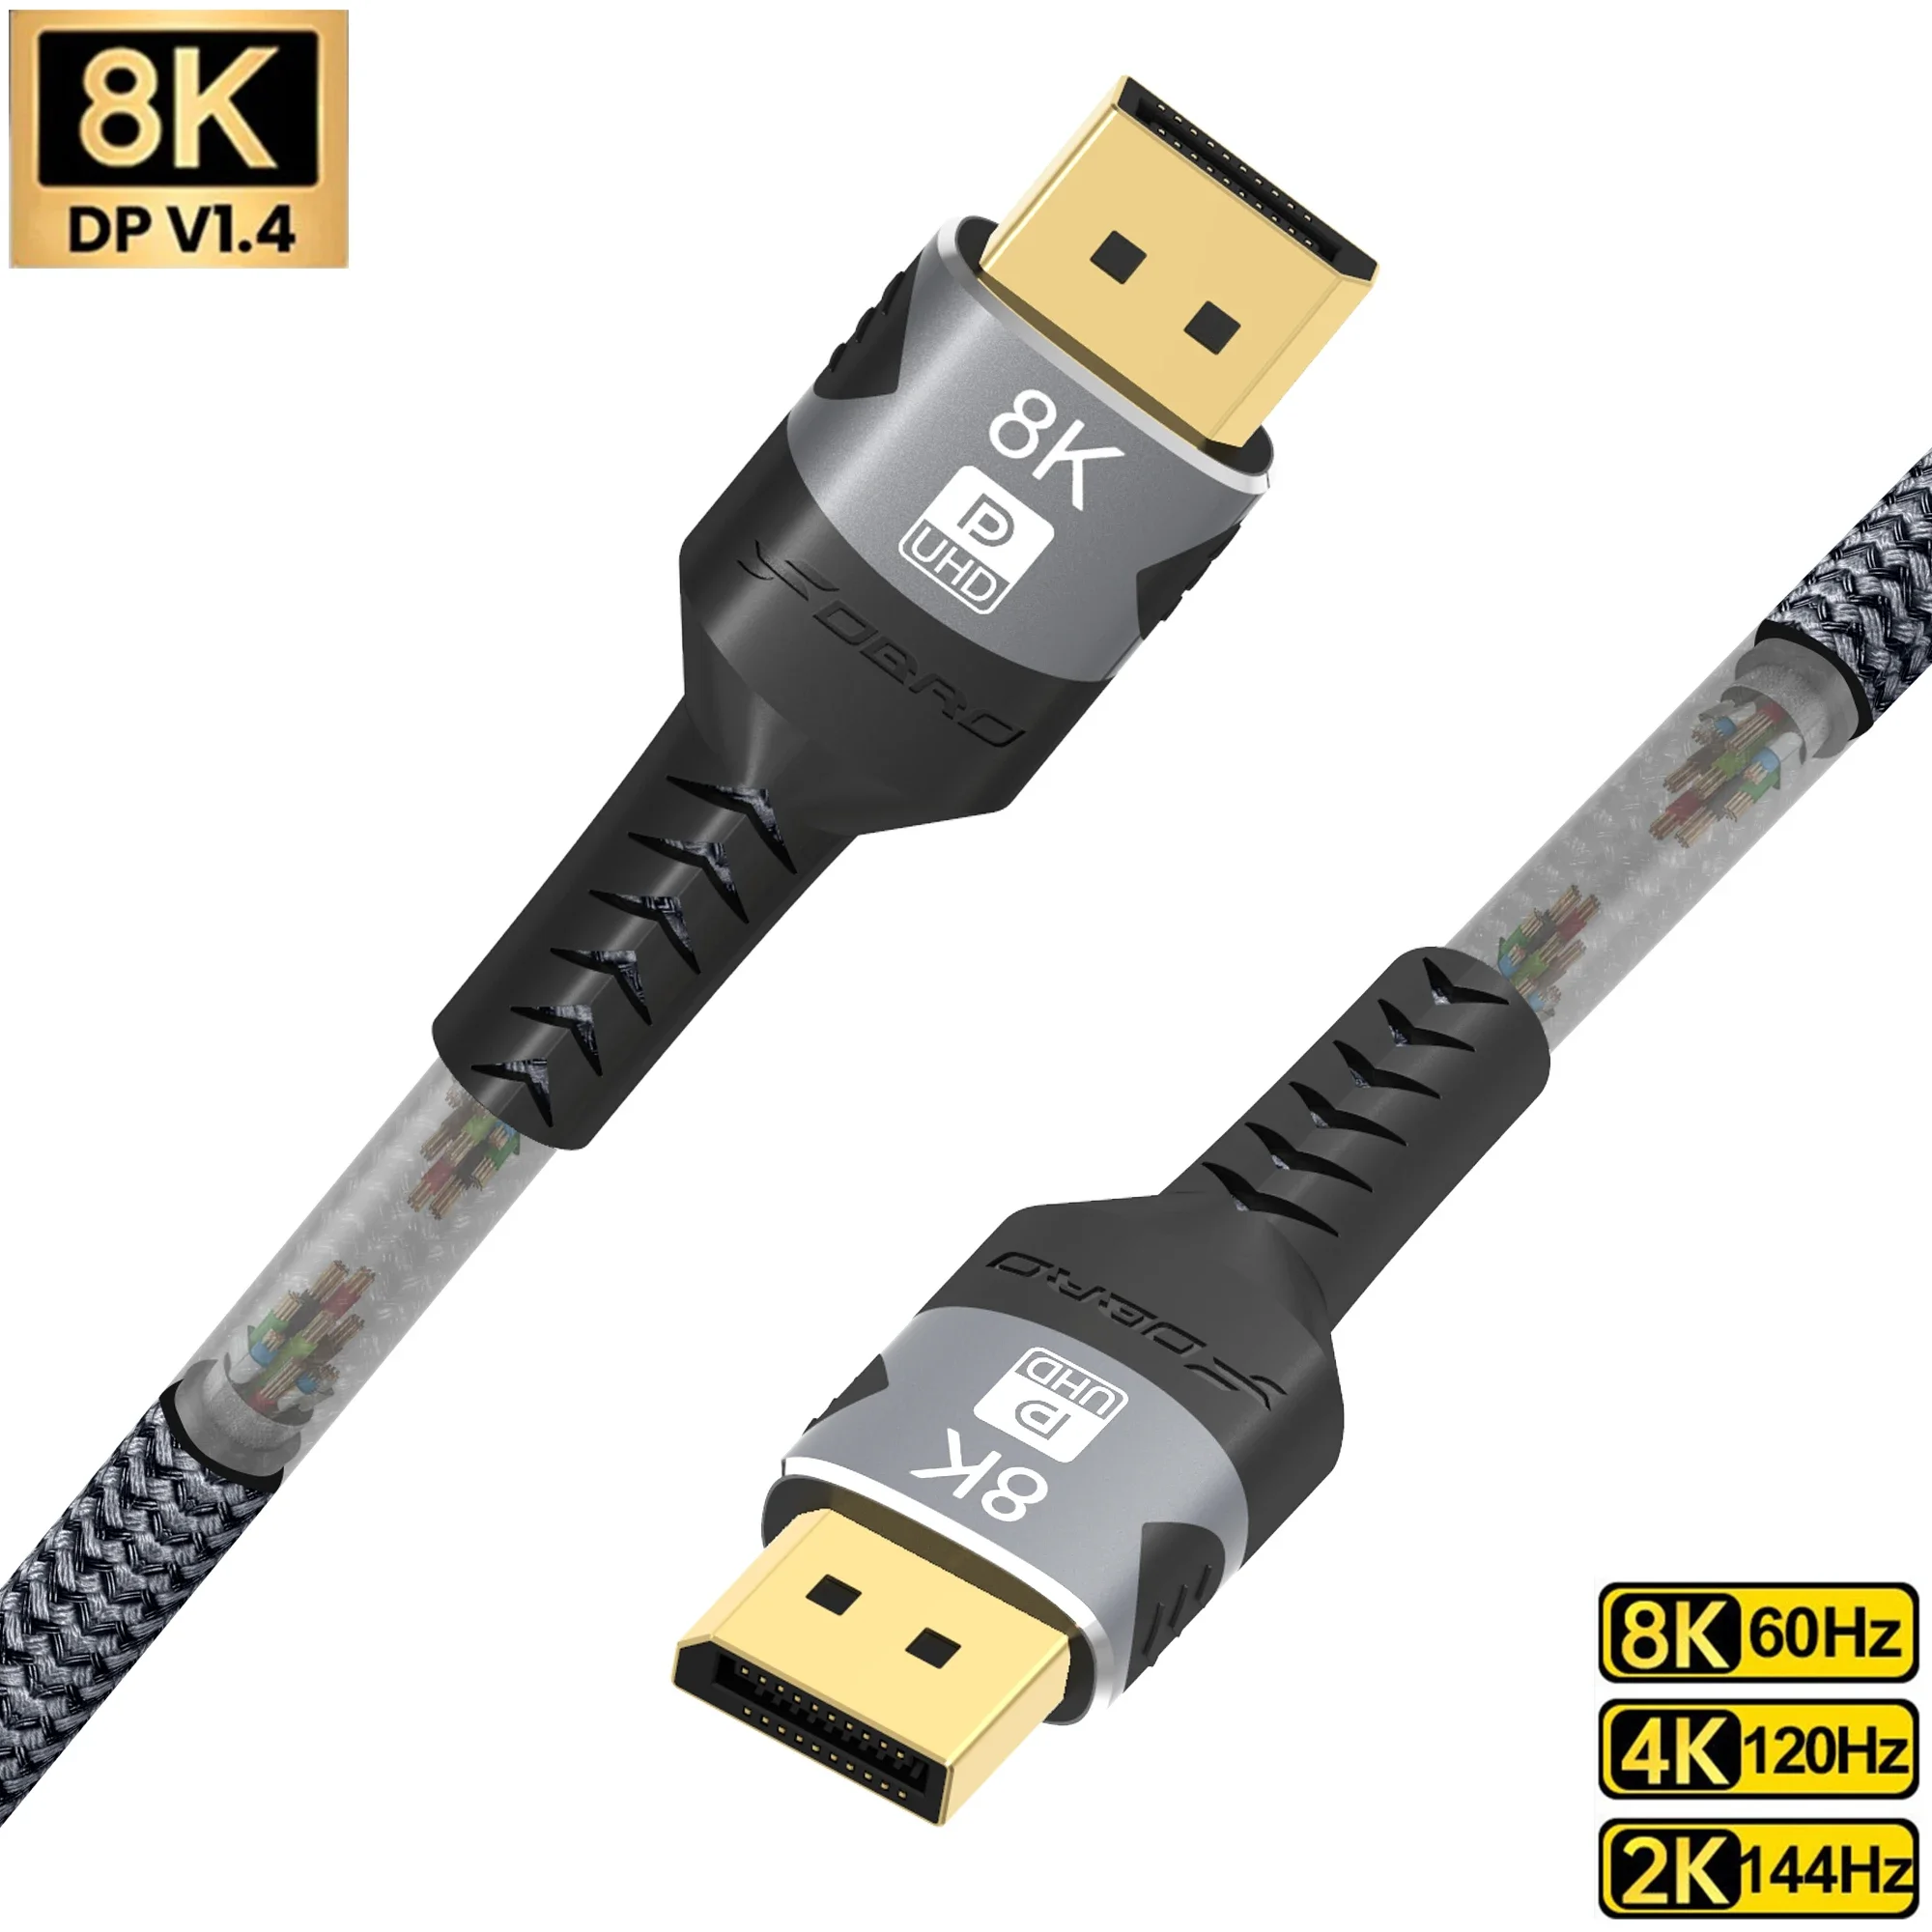 

HDMI 8K Cable 8K/60Hz 4K/144Hz HMDI 2.1 Weave Cable 48Gbps For HDTV Splitter Switcher PS5 Ps4 Projector eARC Dolby Vision UHD